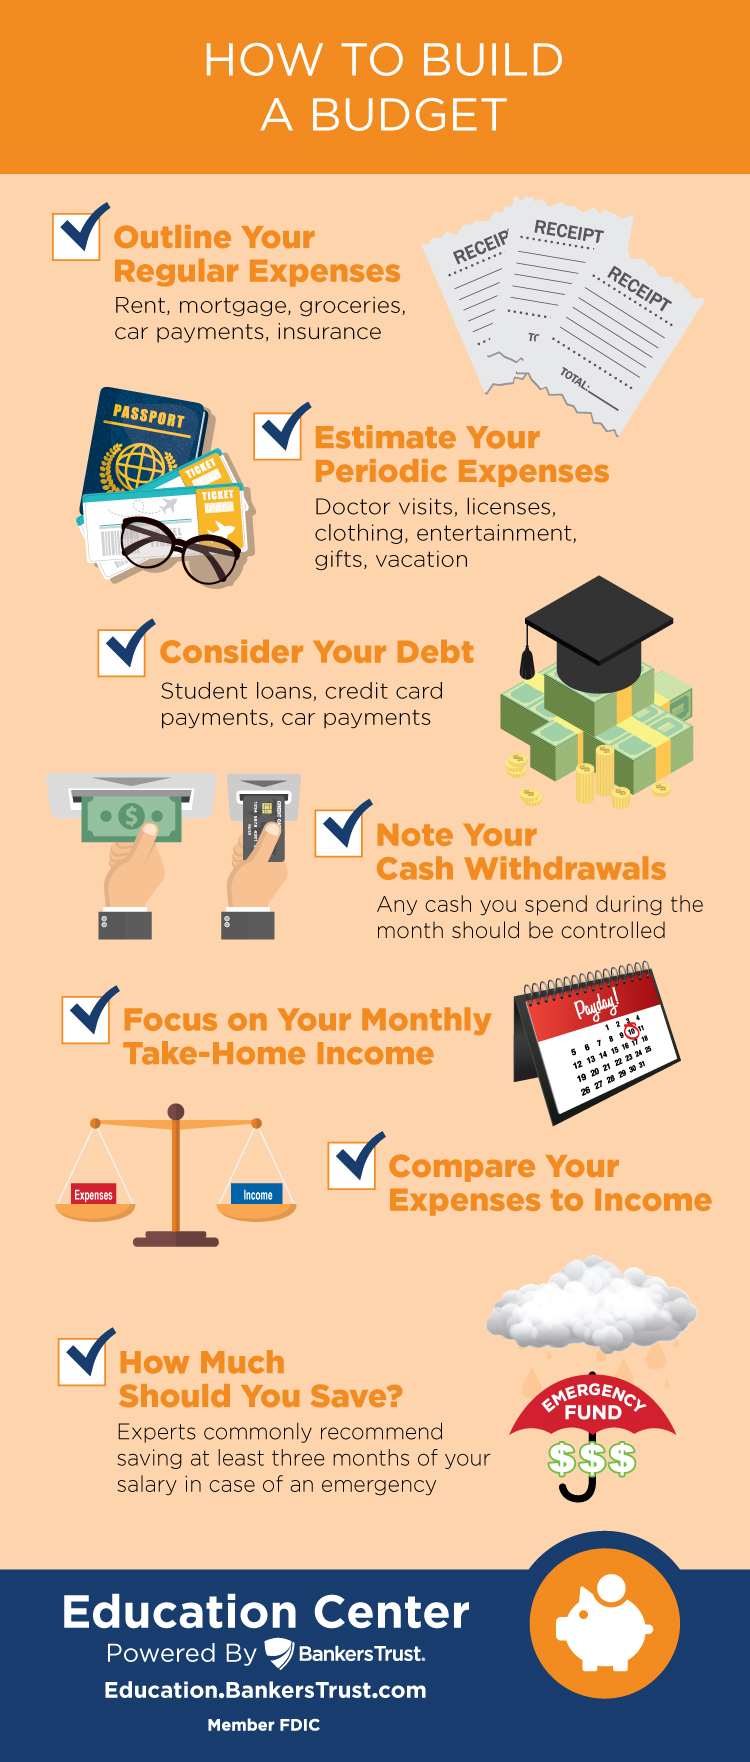 how to build a budget infographic